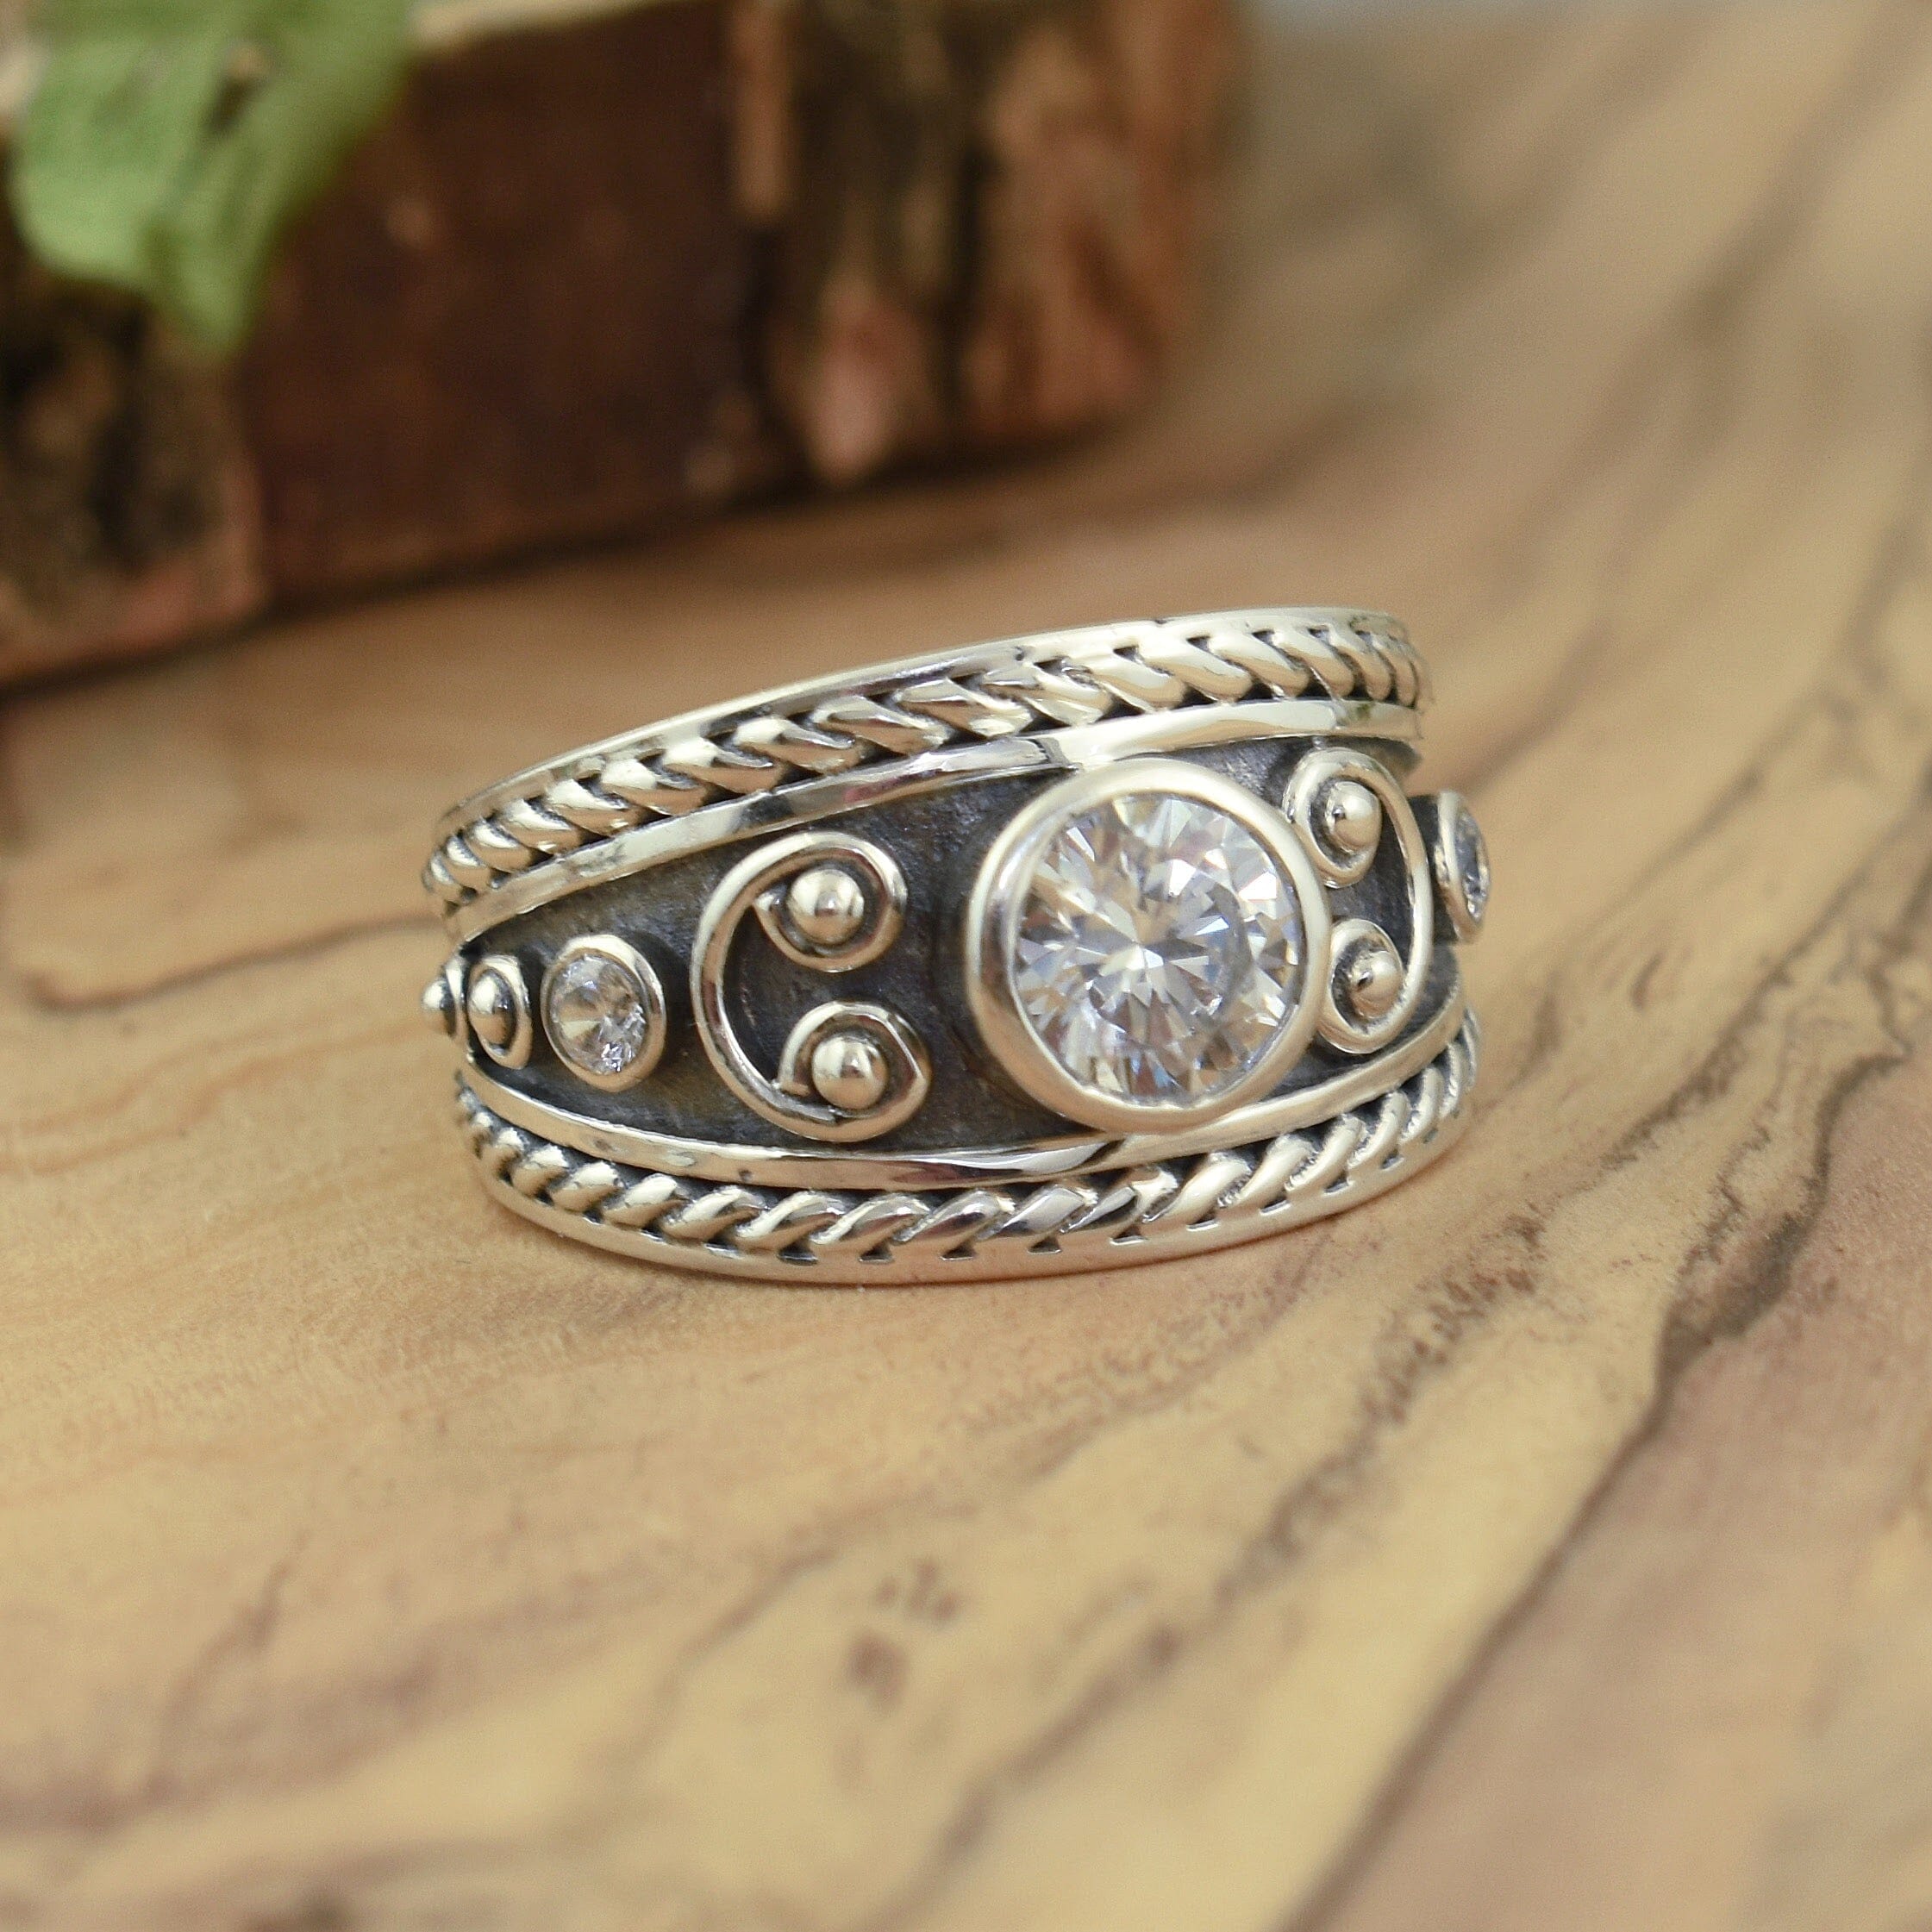 Designer inspired sterling silver ring with round cz accent stones